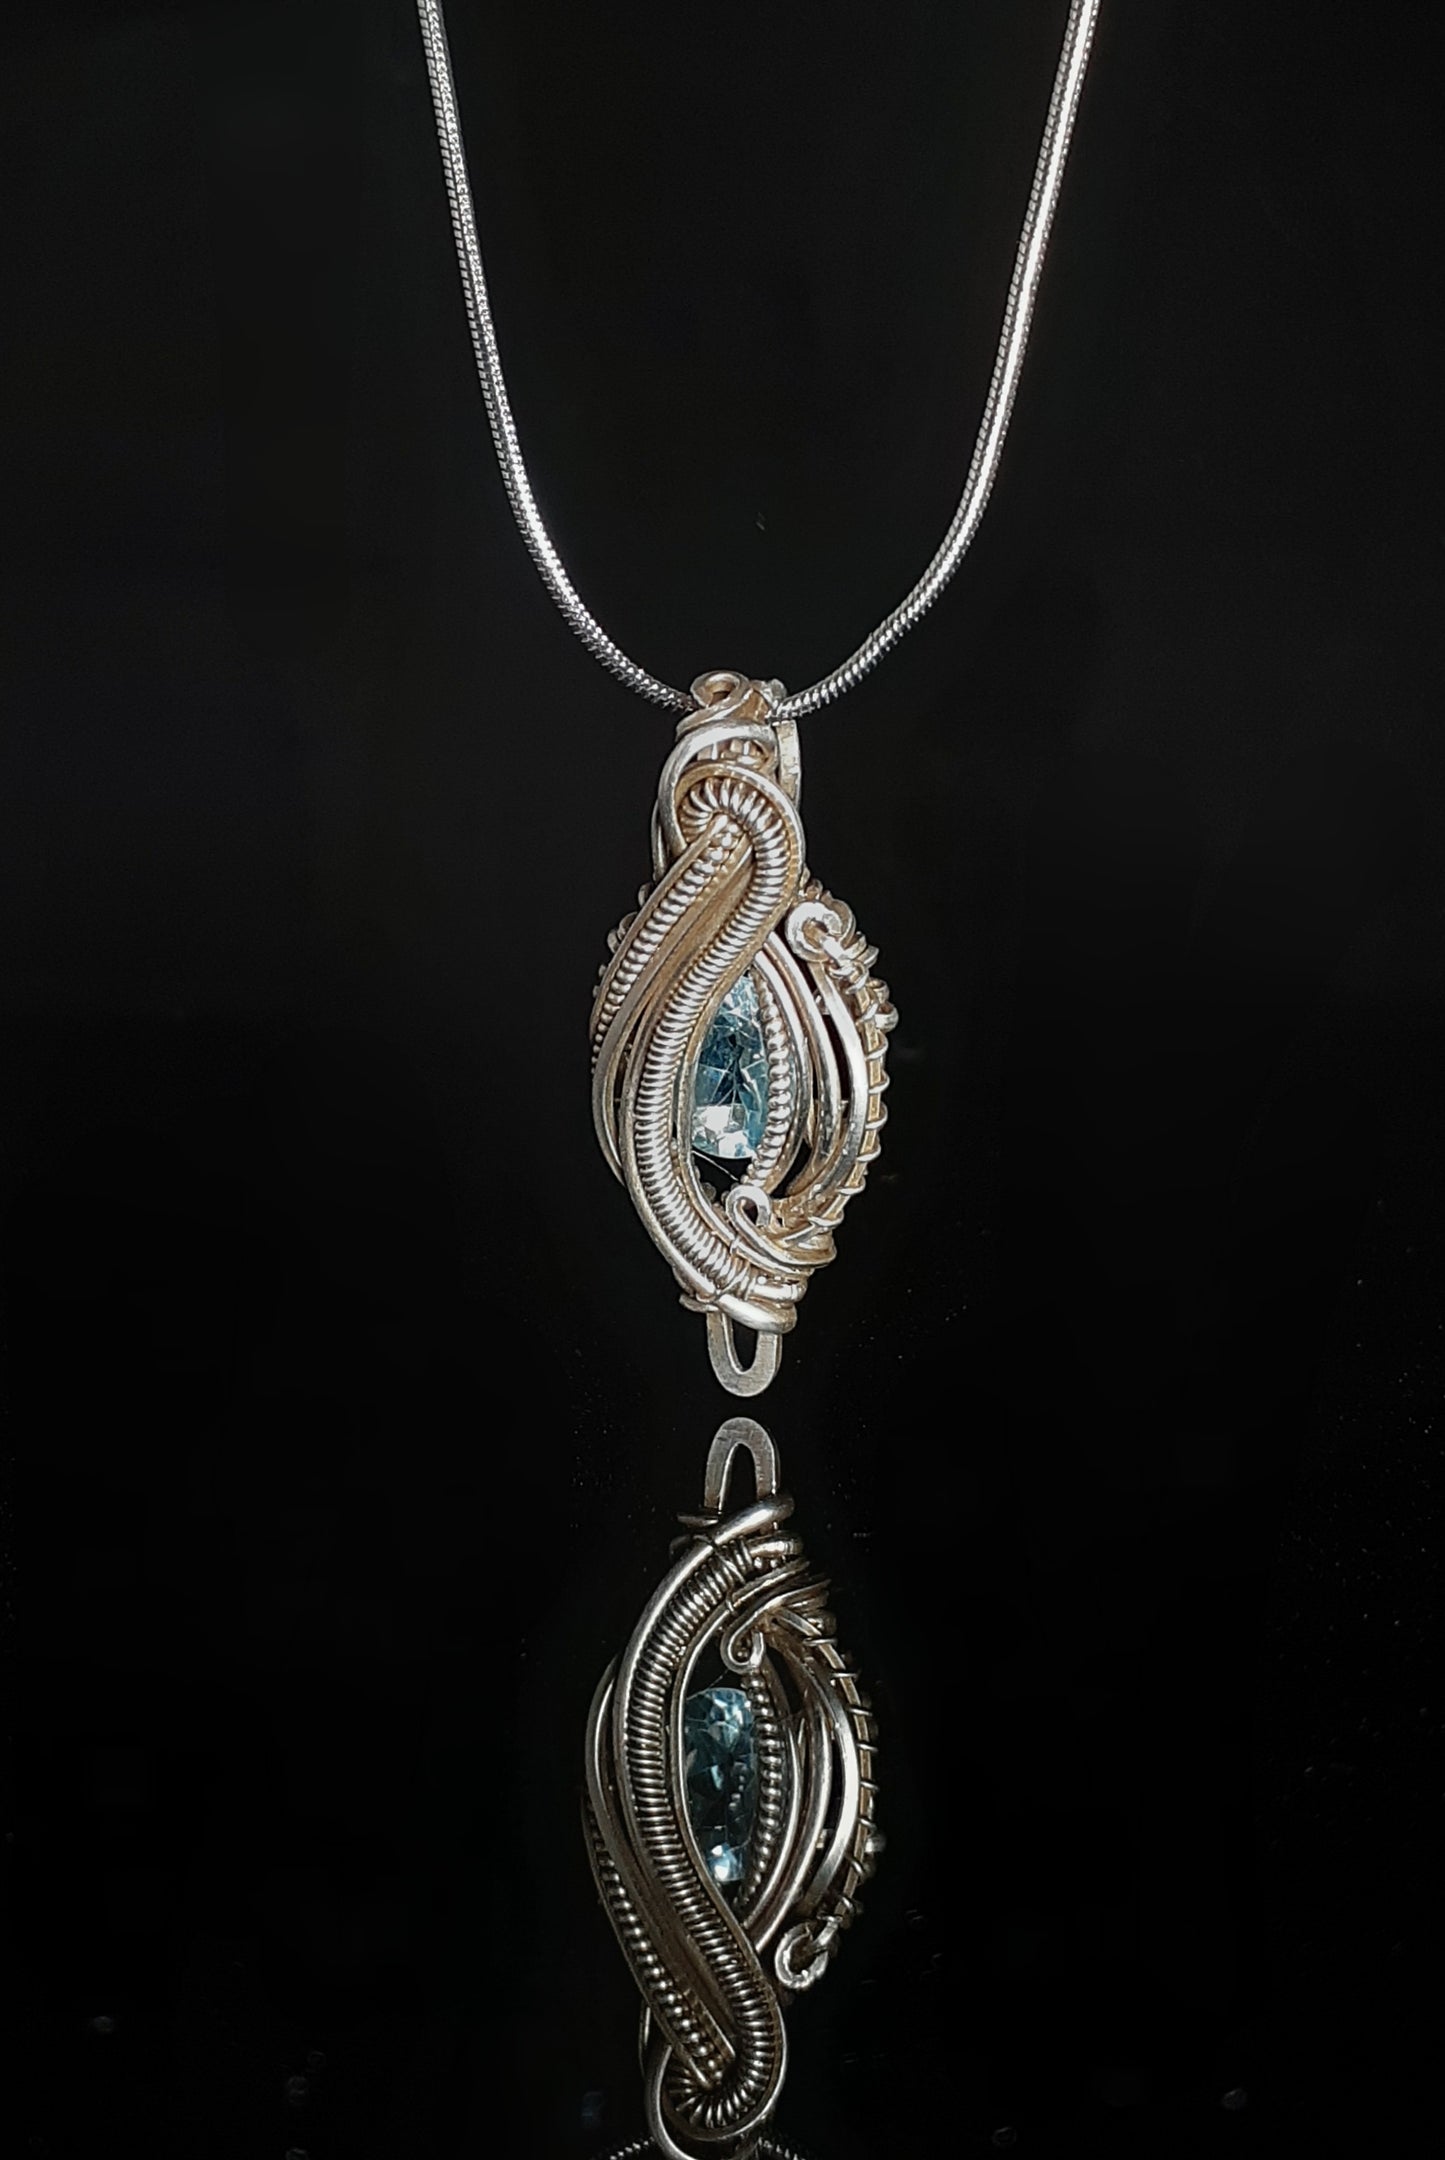 Blue Topaz Sterling Silver Micro Heady Pendent Artist: Lindsey Griffin  Blue topaz stone set in sterling silver micro heady style pendent necklace